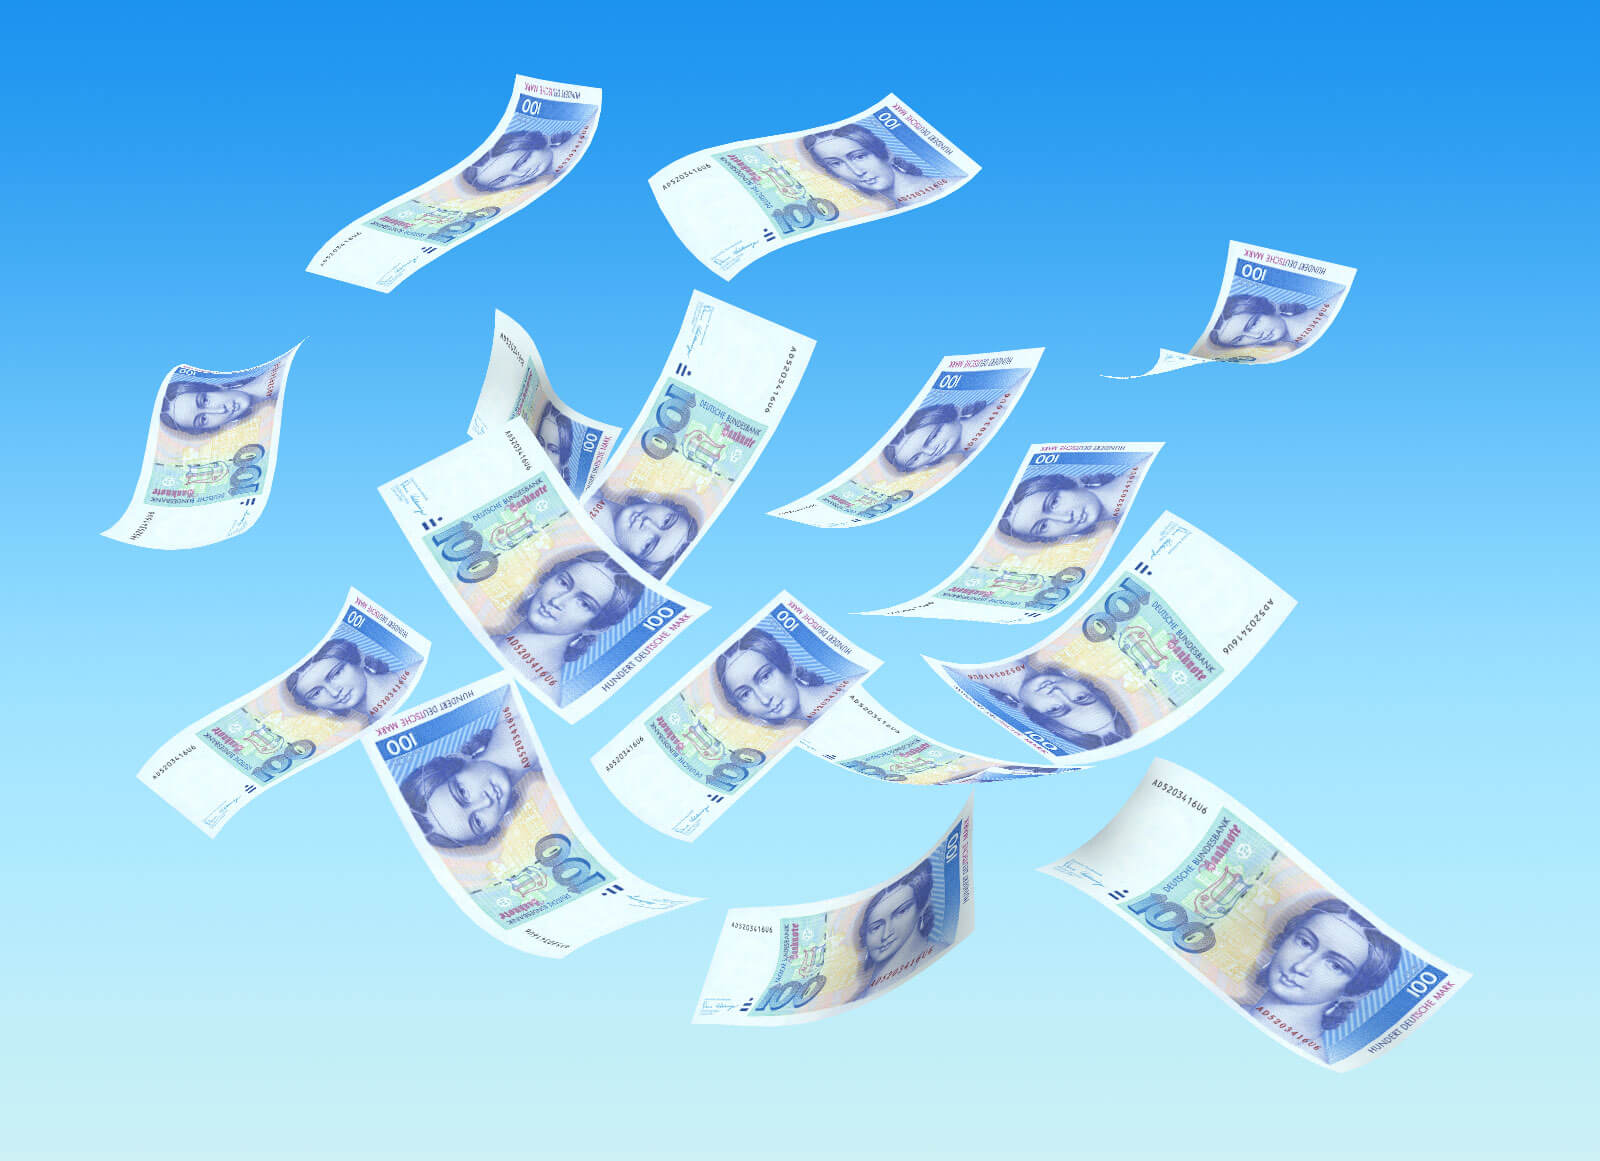 Free-Currency-Bank-Notes-Flying-in-Air-Mockup-PSD-2